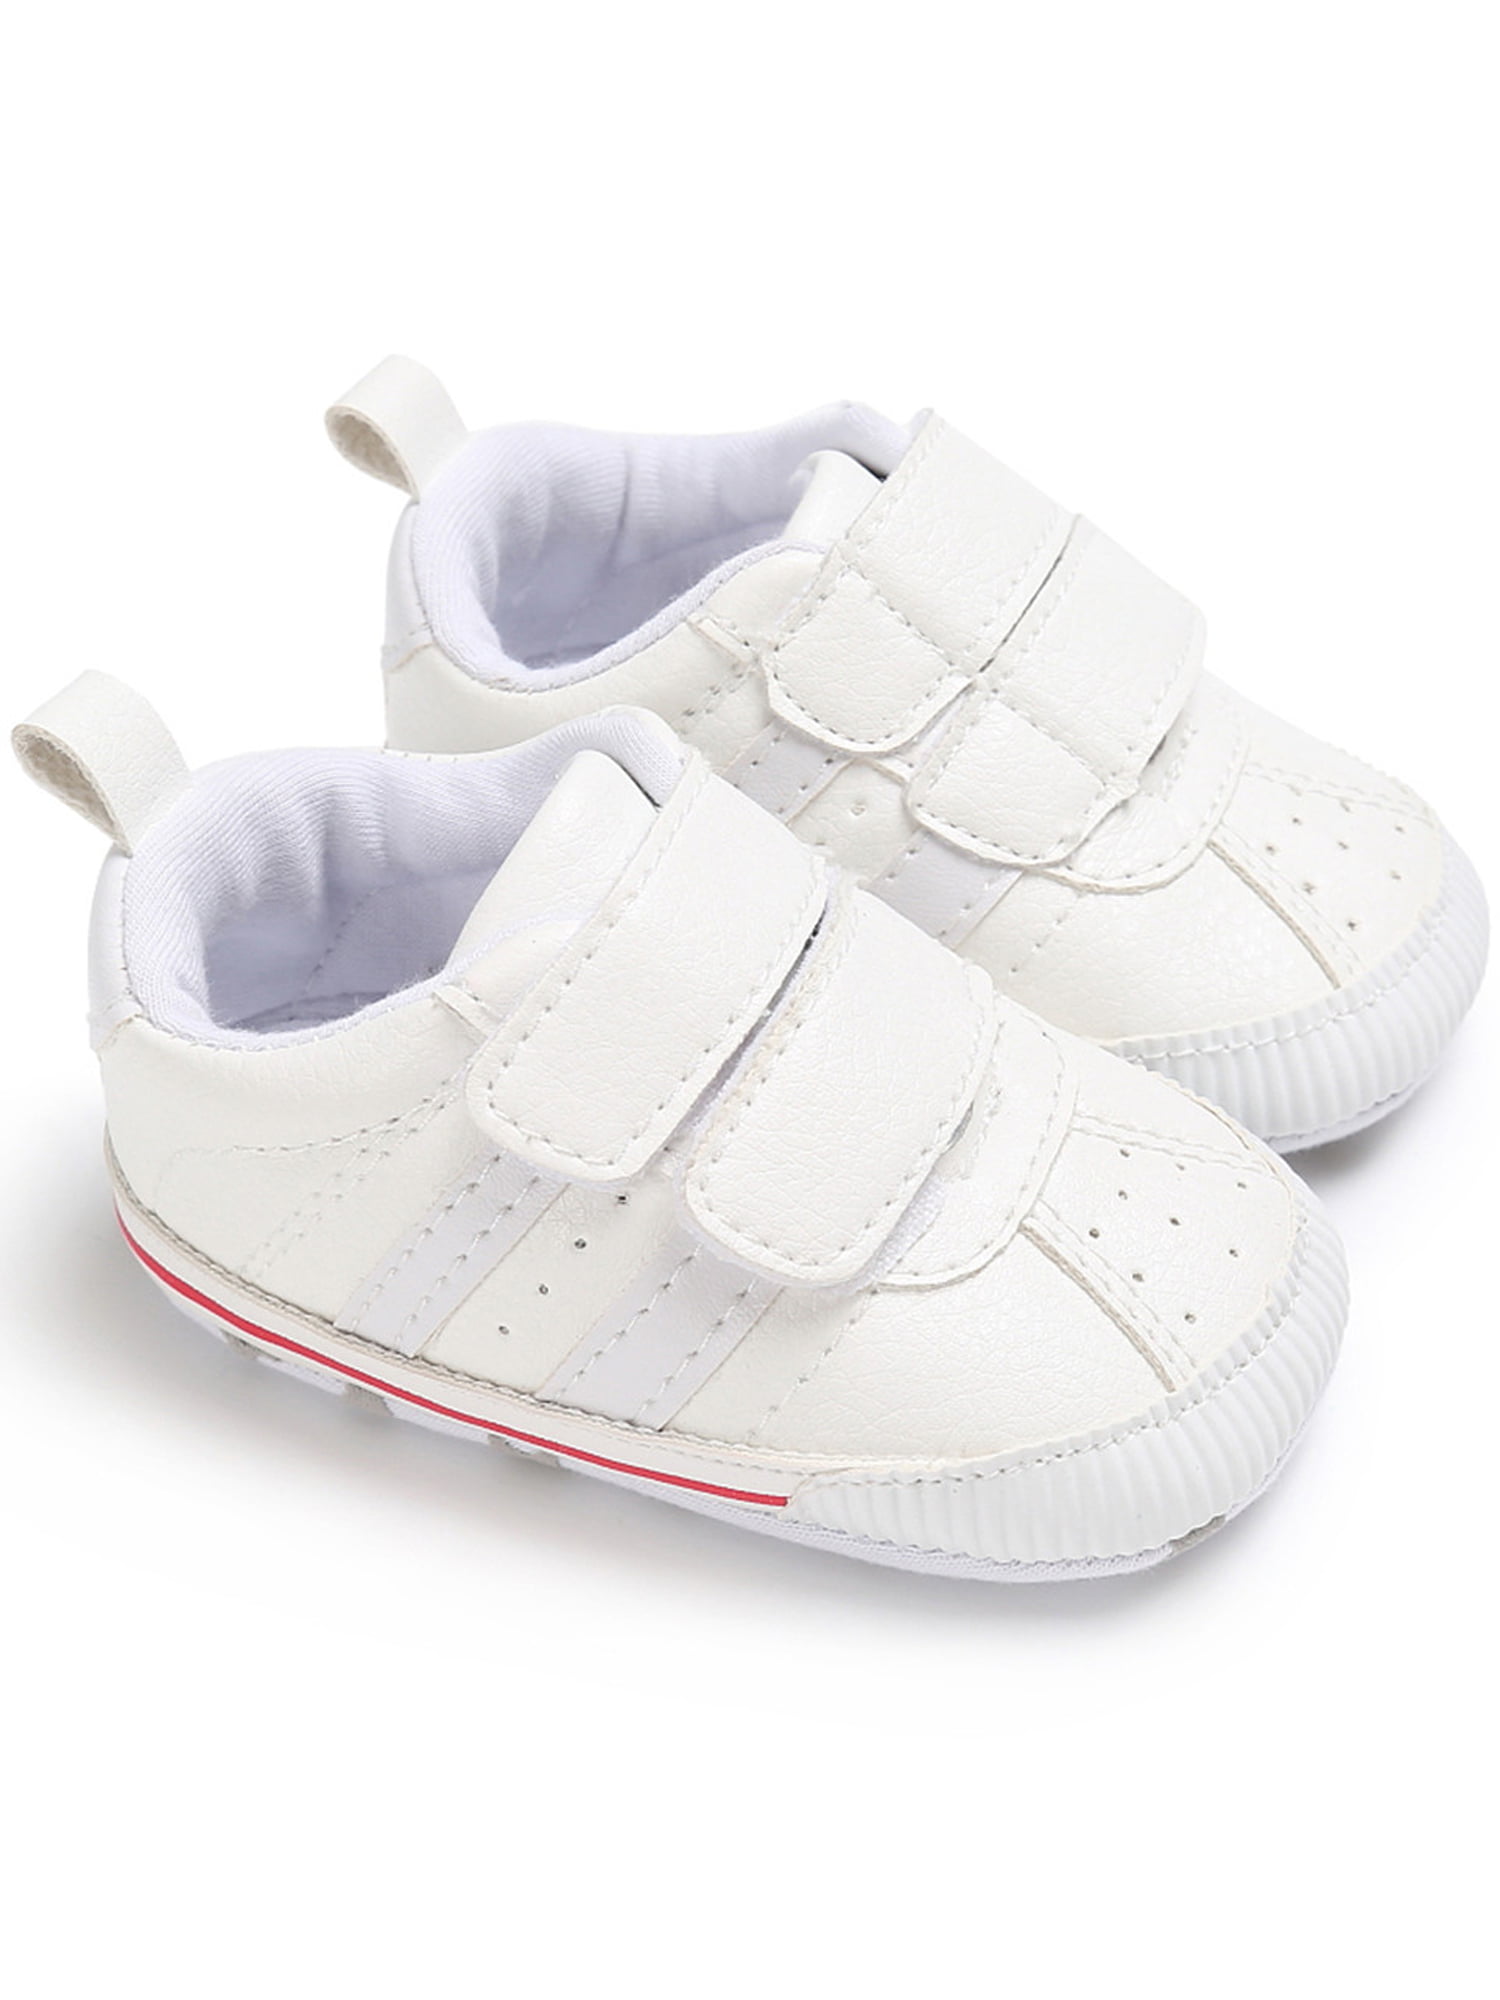 Baby Boots Soft Bottom Anti-skid Leather Sports Crib Shoes For Infant Girls Boys